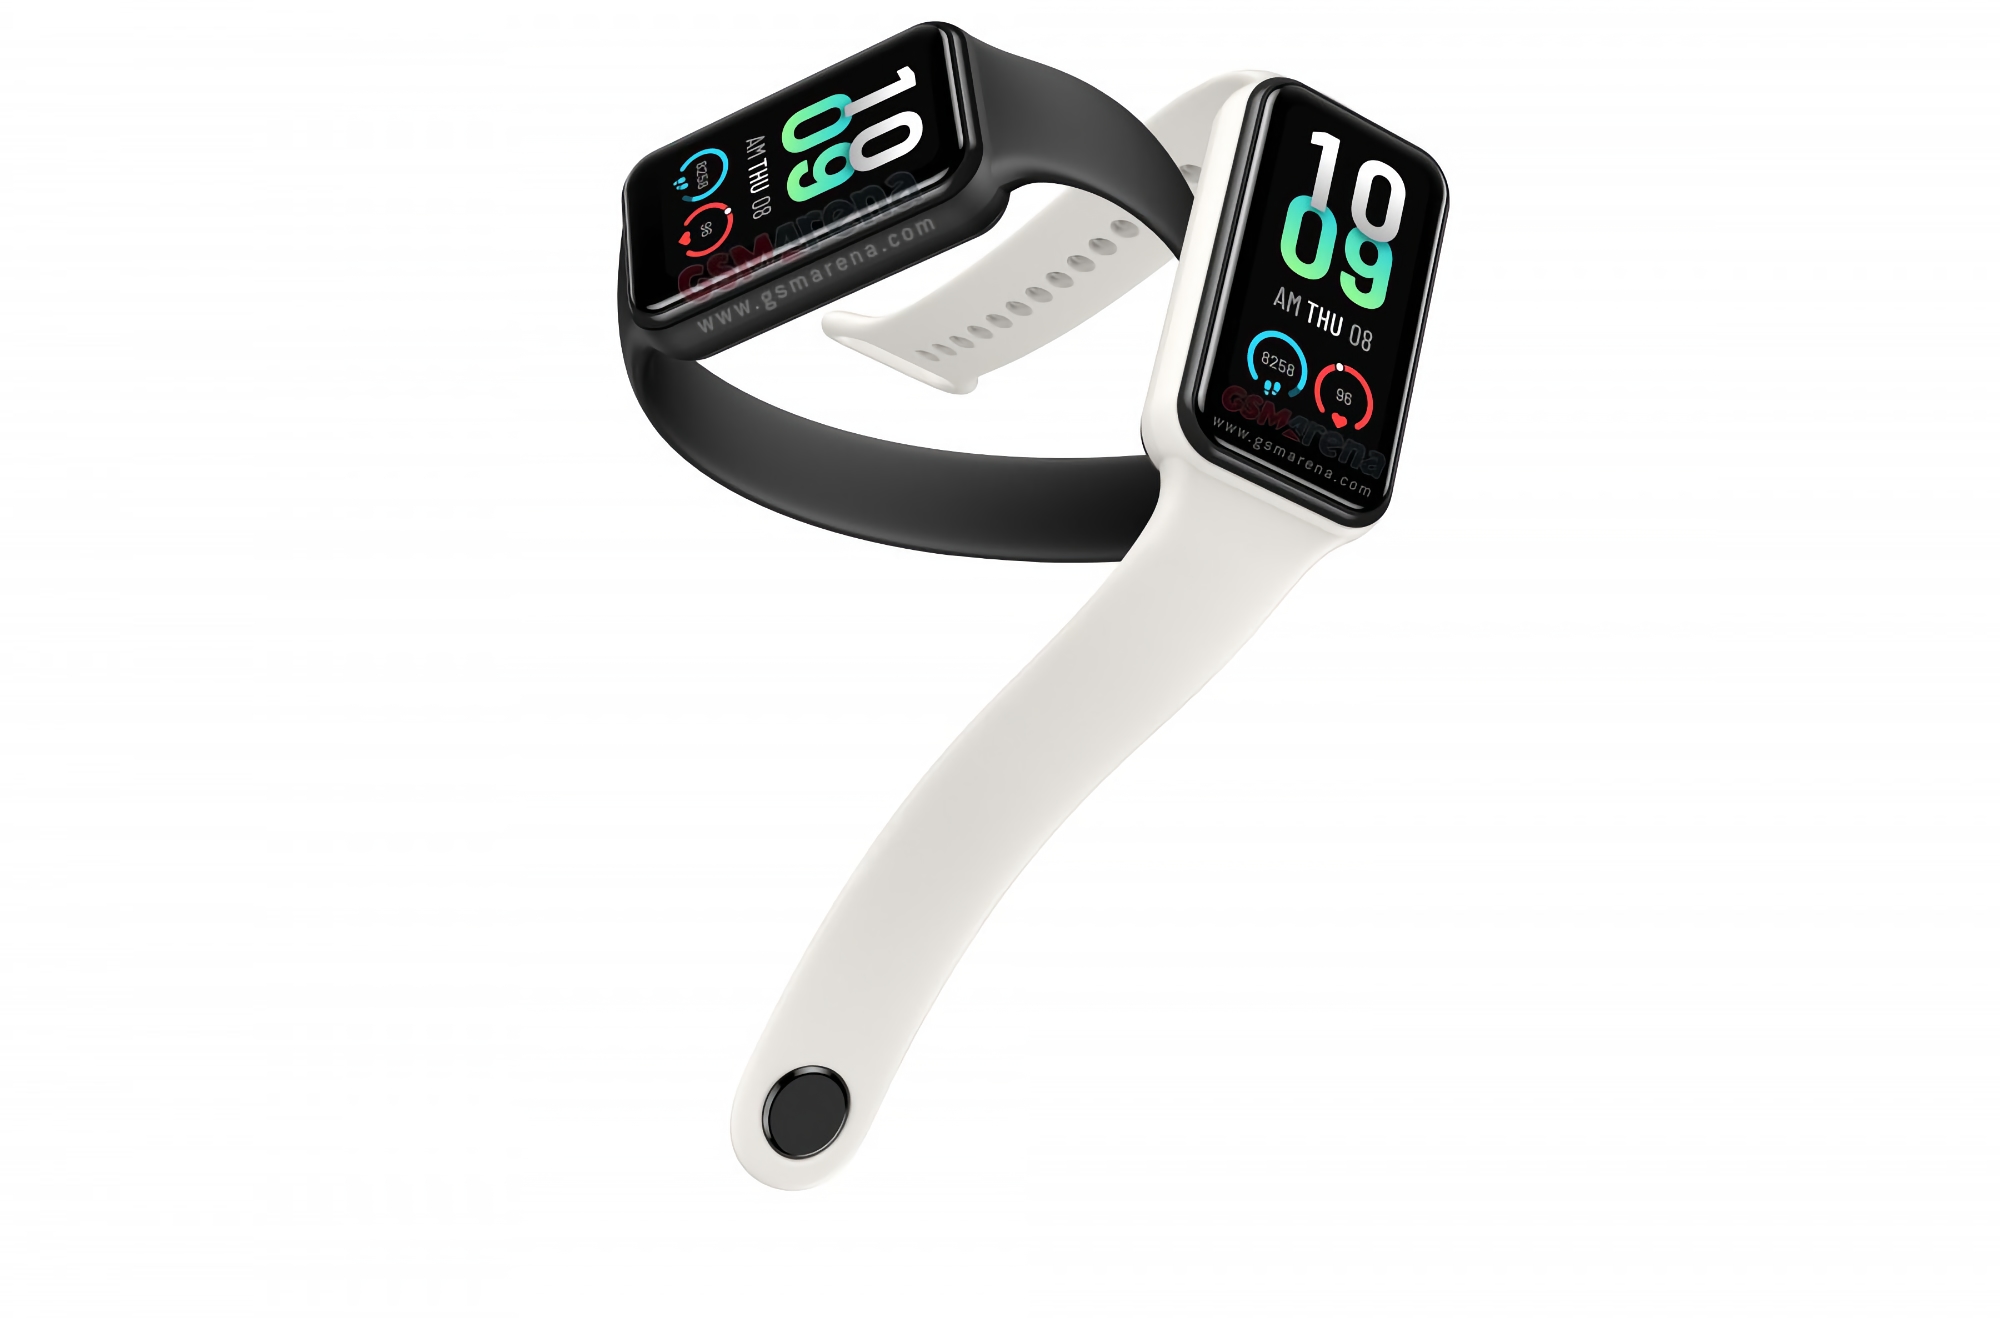 Amazfit Band 7 smart bracelet will look like this: a copy of the